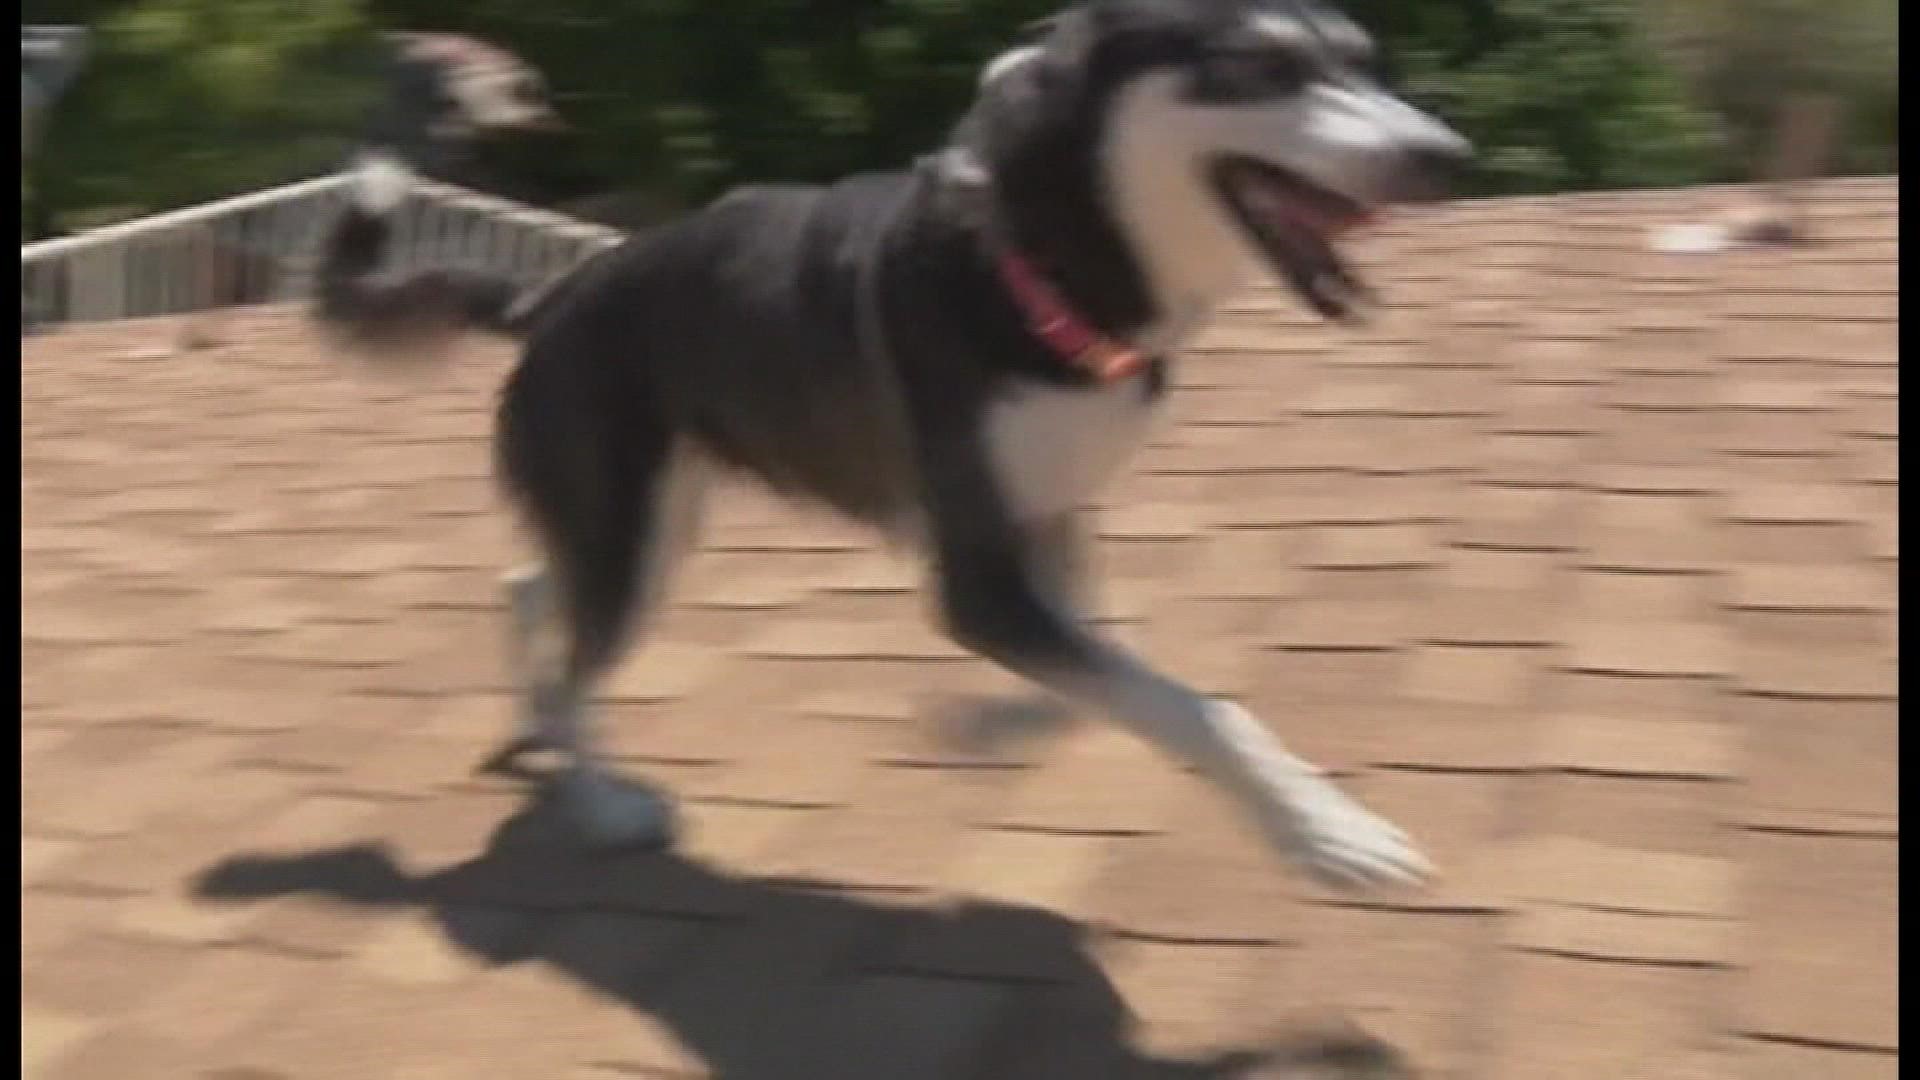 A dog that loves to hang on the roof of her house is becoming the talk of the town in Glendale, Arizona.